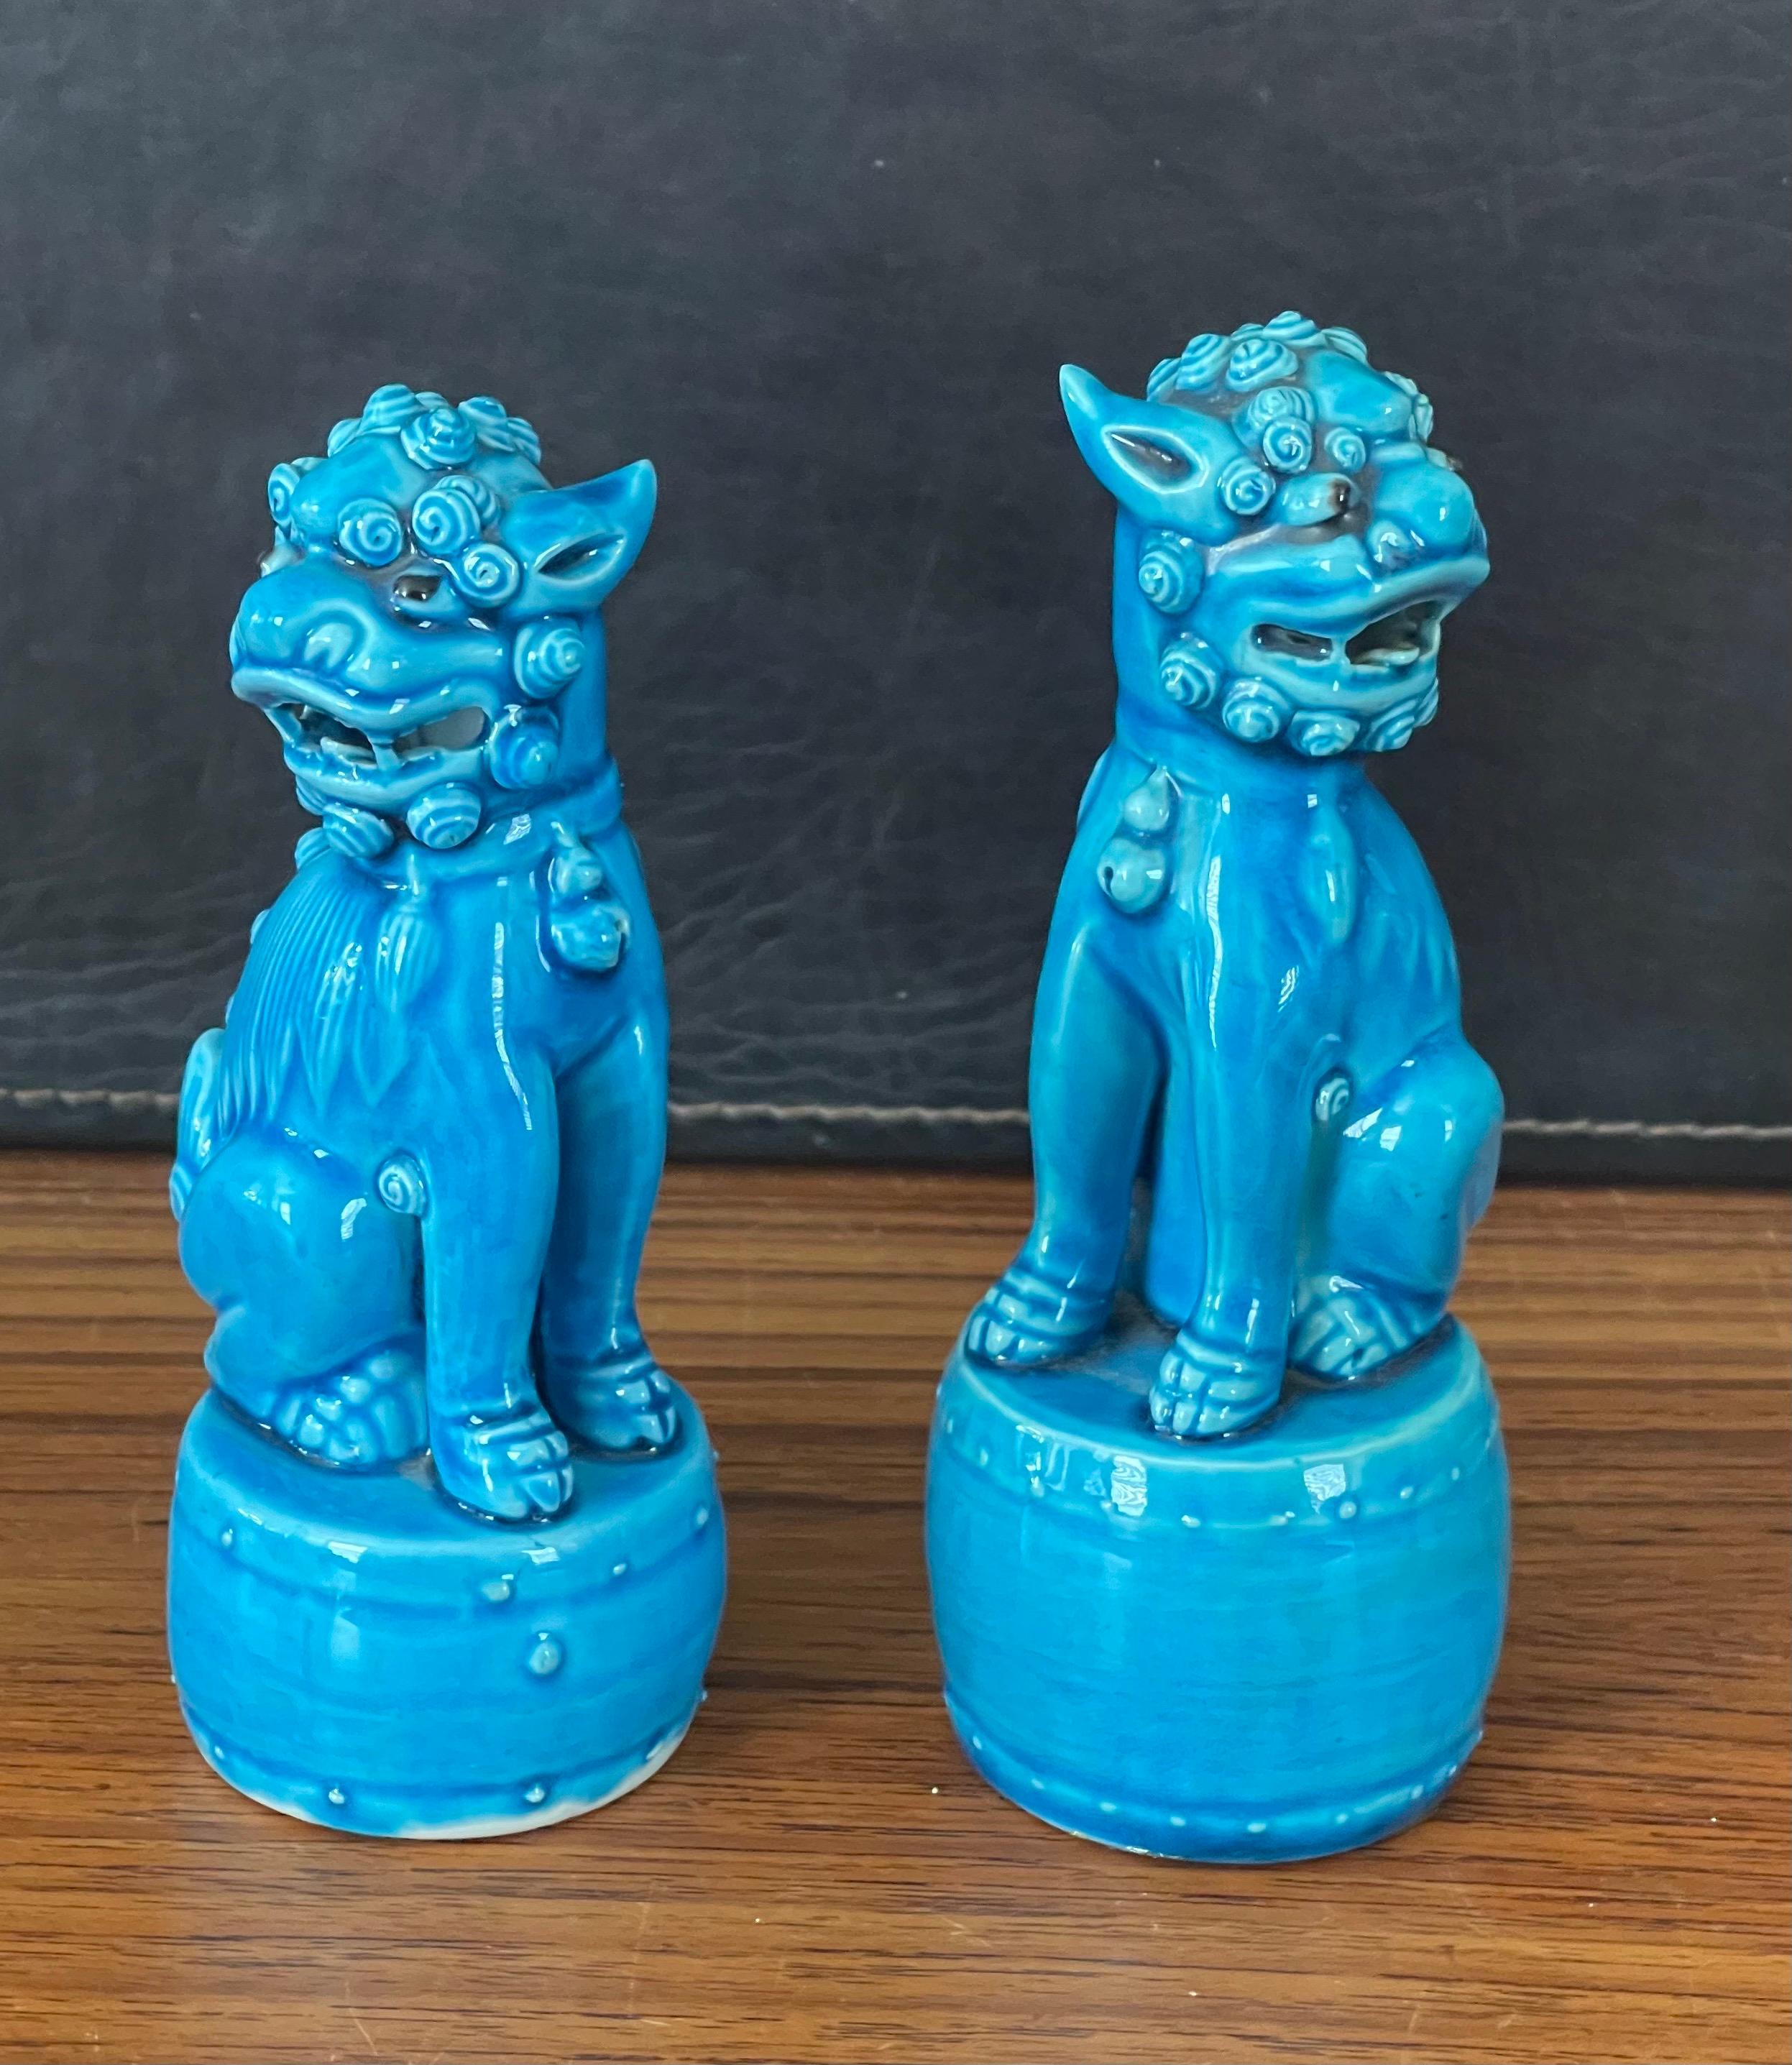 Super cute petite pair of vintage turquoise blue ceramic foo dog sculptures, circa 1960s. These symbolic guardians present a beautiful turquoise hue along with great lines and swirls in the ceramic. 
The pair are in very good condition with no